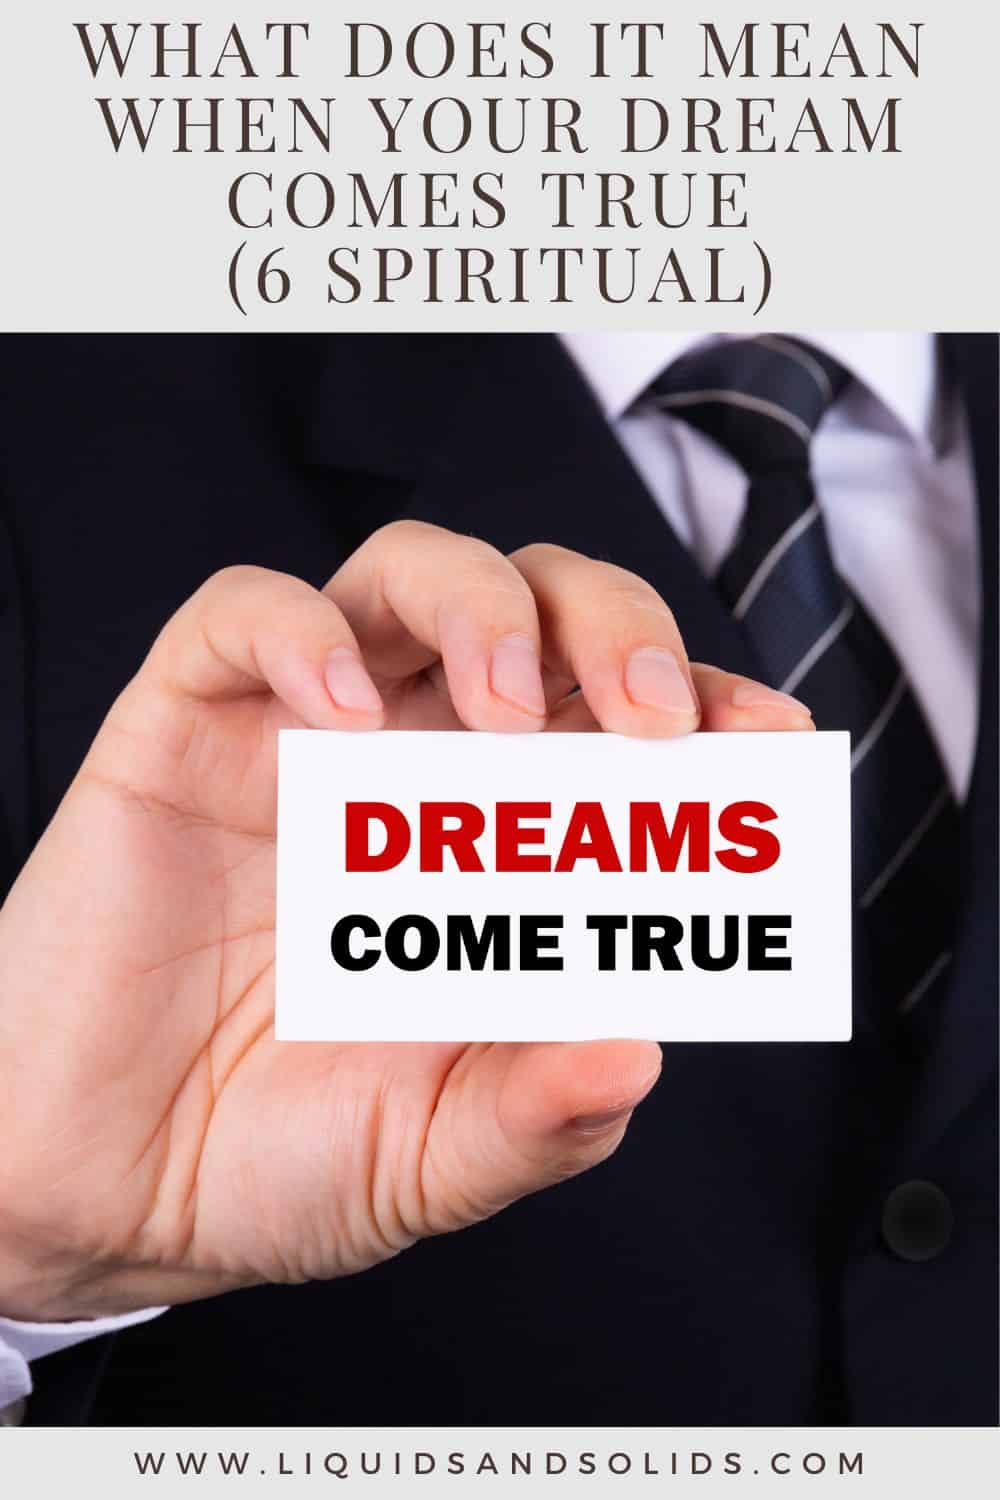 What Does It Mean When Your Dream Comes True (6 Spiritual)